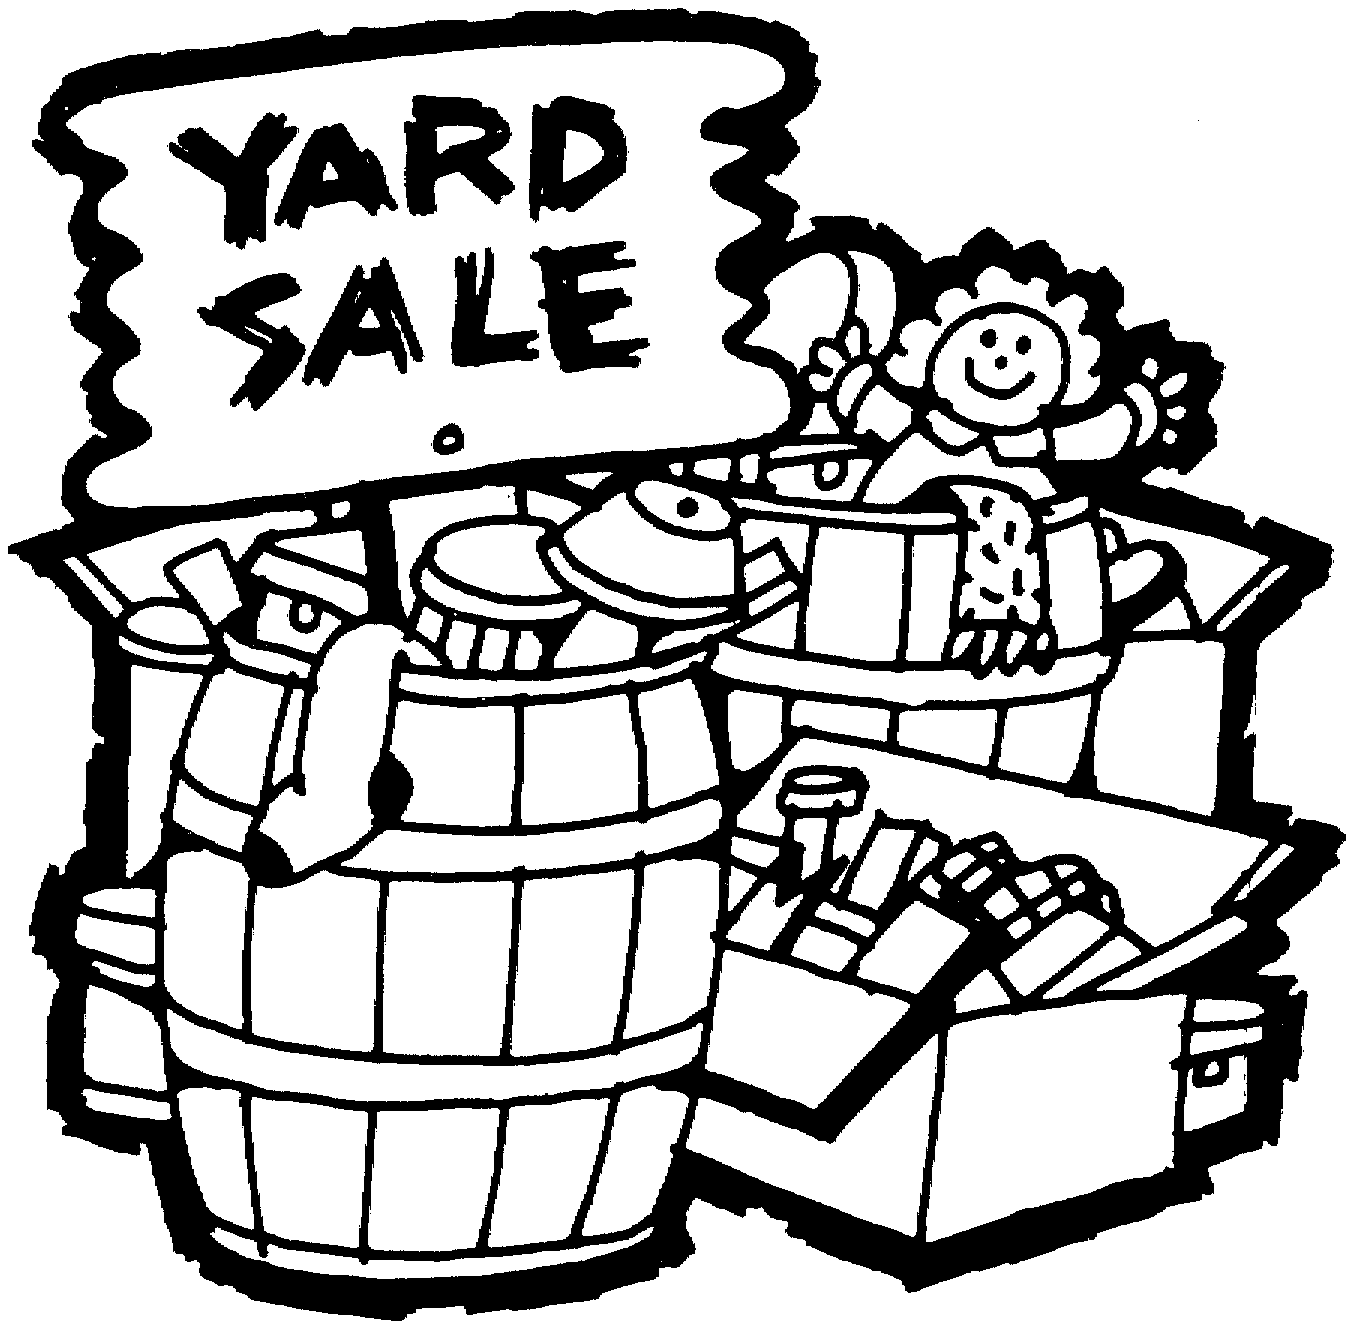 Free Yard Sale Clip Art Pictures.